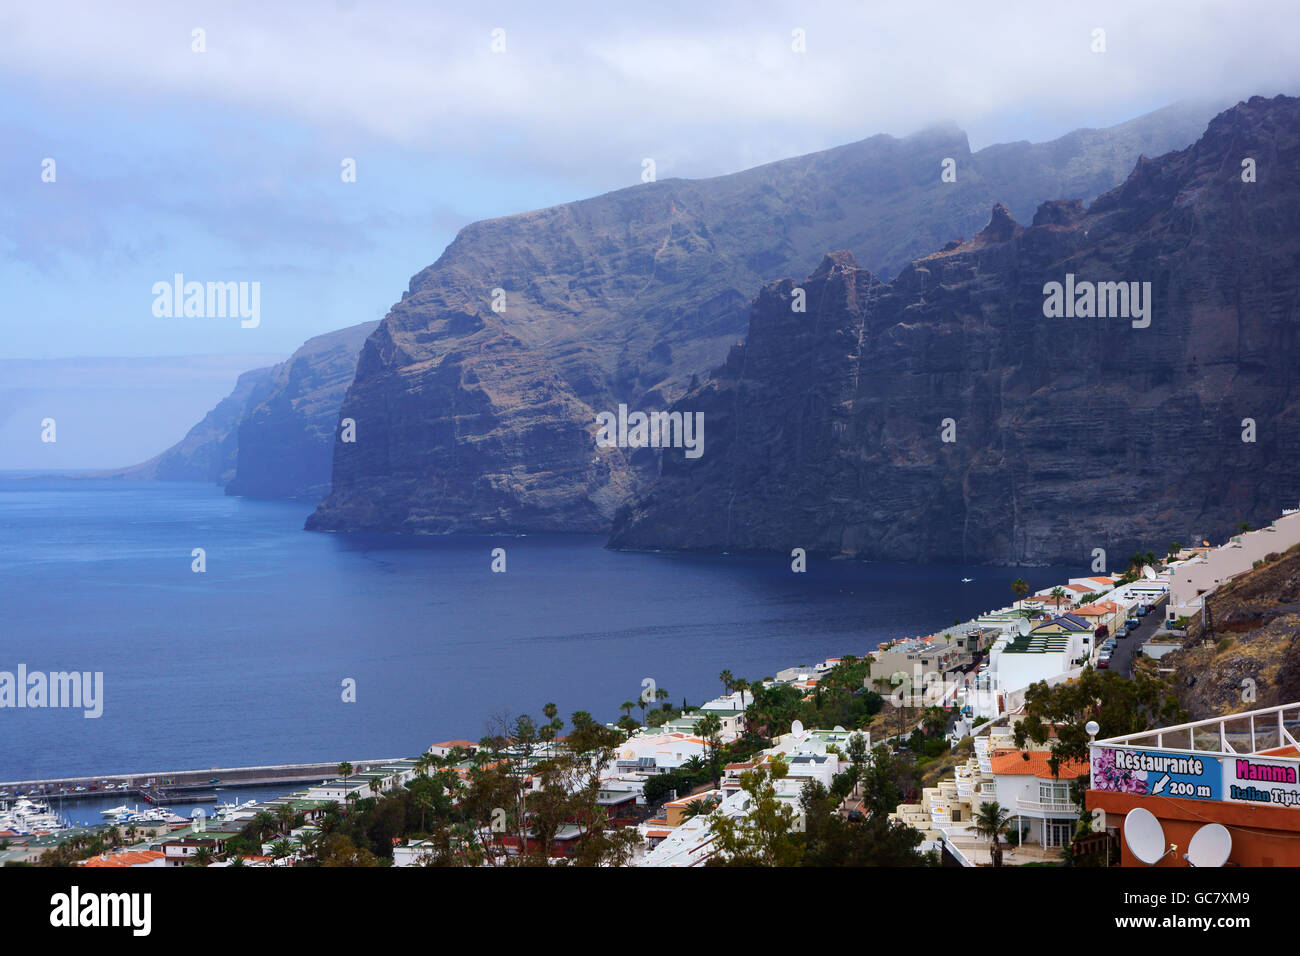 'Los Gigantes' cliffs and resort town, Island Teneriffe, Canary Islands, Spain Stock Photo